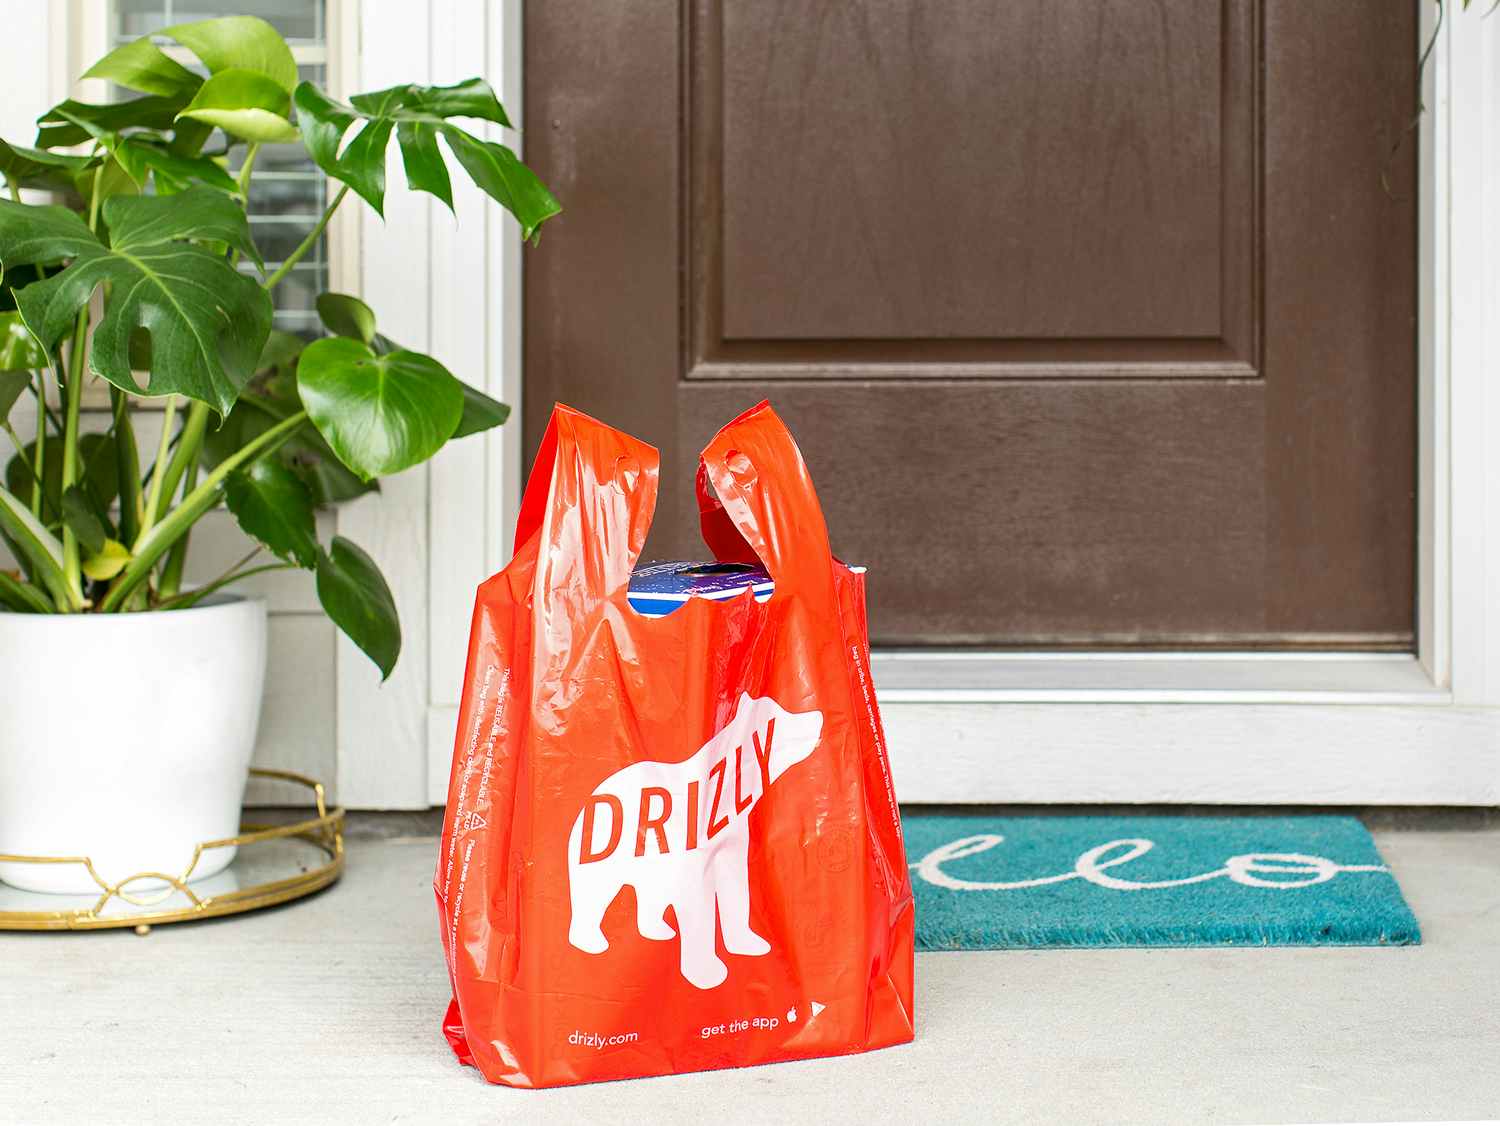 drizly alcohol delivery service bag on front porch